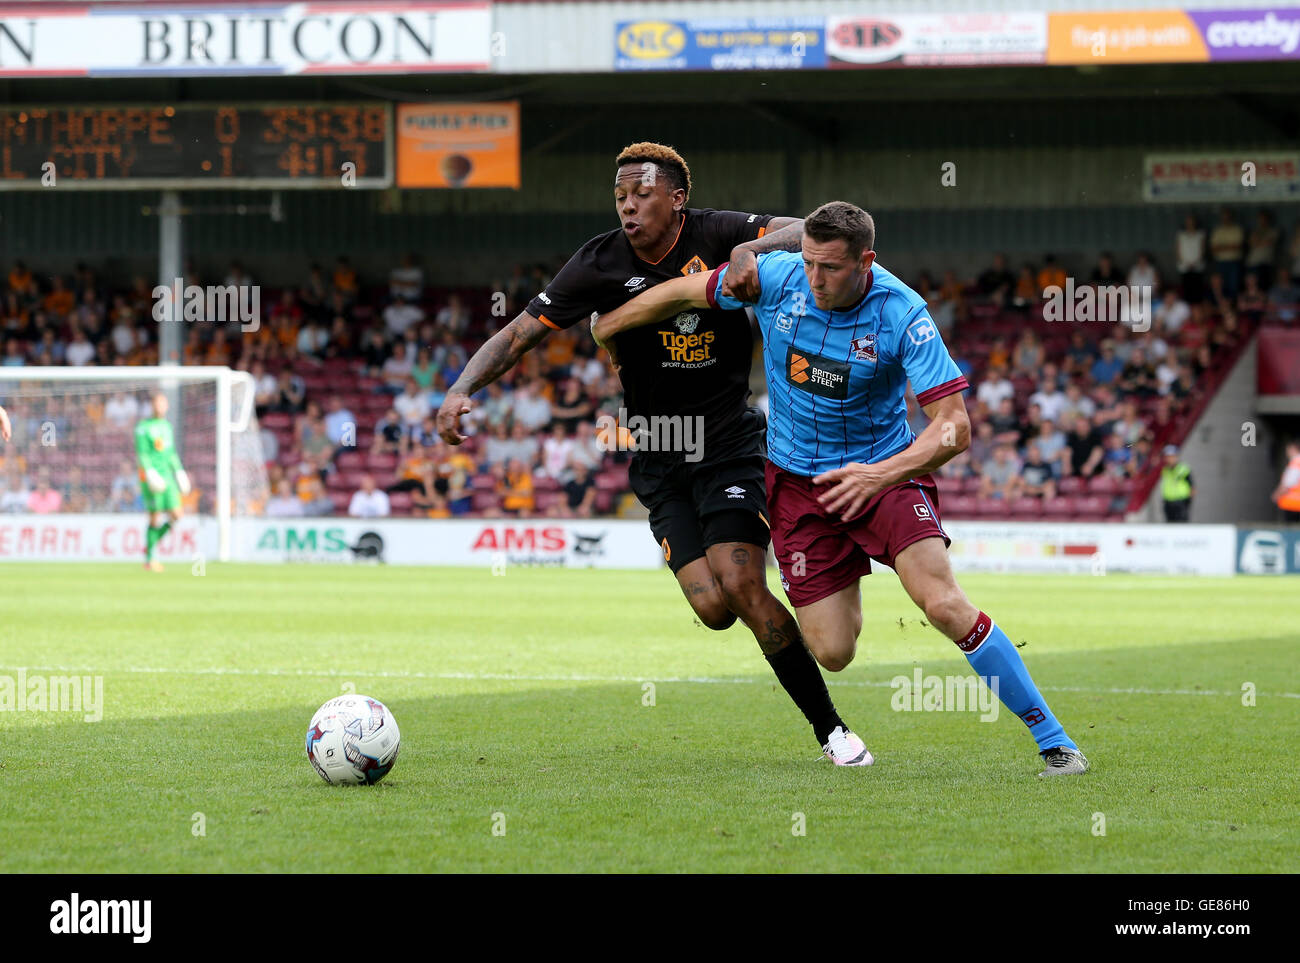 Scunthorpe United's Murray Wallace (right) and Hull City's Abel Hernandez battle for the ball the pre-season friendly match at Glanford Park, Scunthorpe. PRESS ASSOCIATION Photo. Picture date: Saturday July 23, 2016. See PA story SOCCER Scunthorpe. Photo credit should read: Richard Sellers/PA Wire. RESTRICTIONS: No use with unauthorised audio, video, data, fixture lists, club/league logos or 'live' services. Online in-match use limited to 75 images, no video emulation. No use in betting, games or single club/league/player publications. Stock Photo